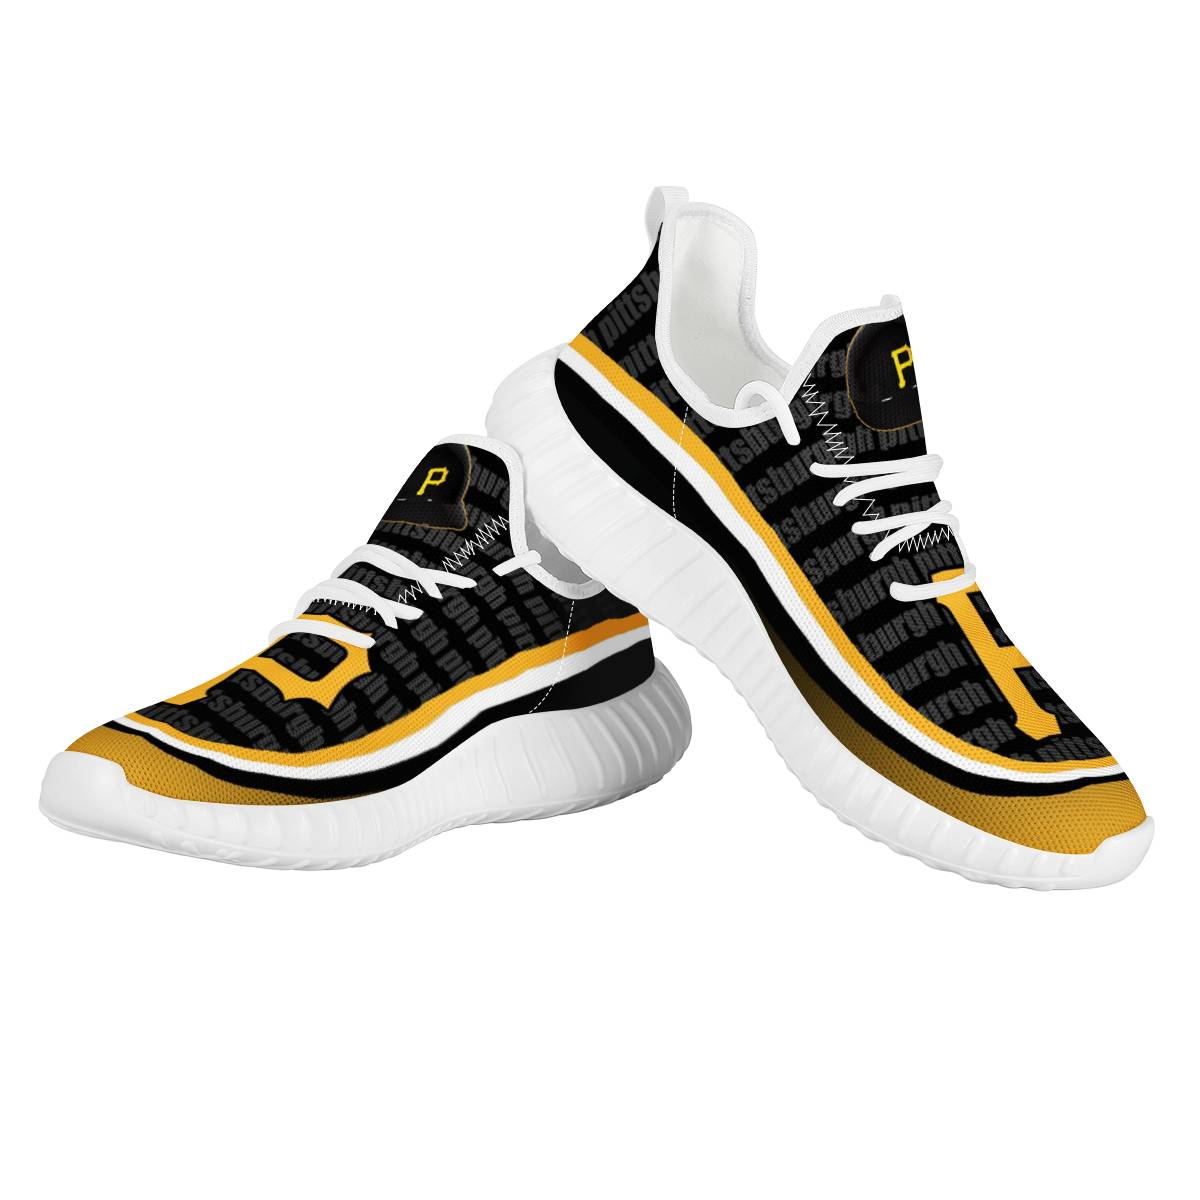 Women's MLB Pittsburgh Pirates Mesh Knit Sneakers/Shoes 001